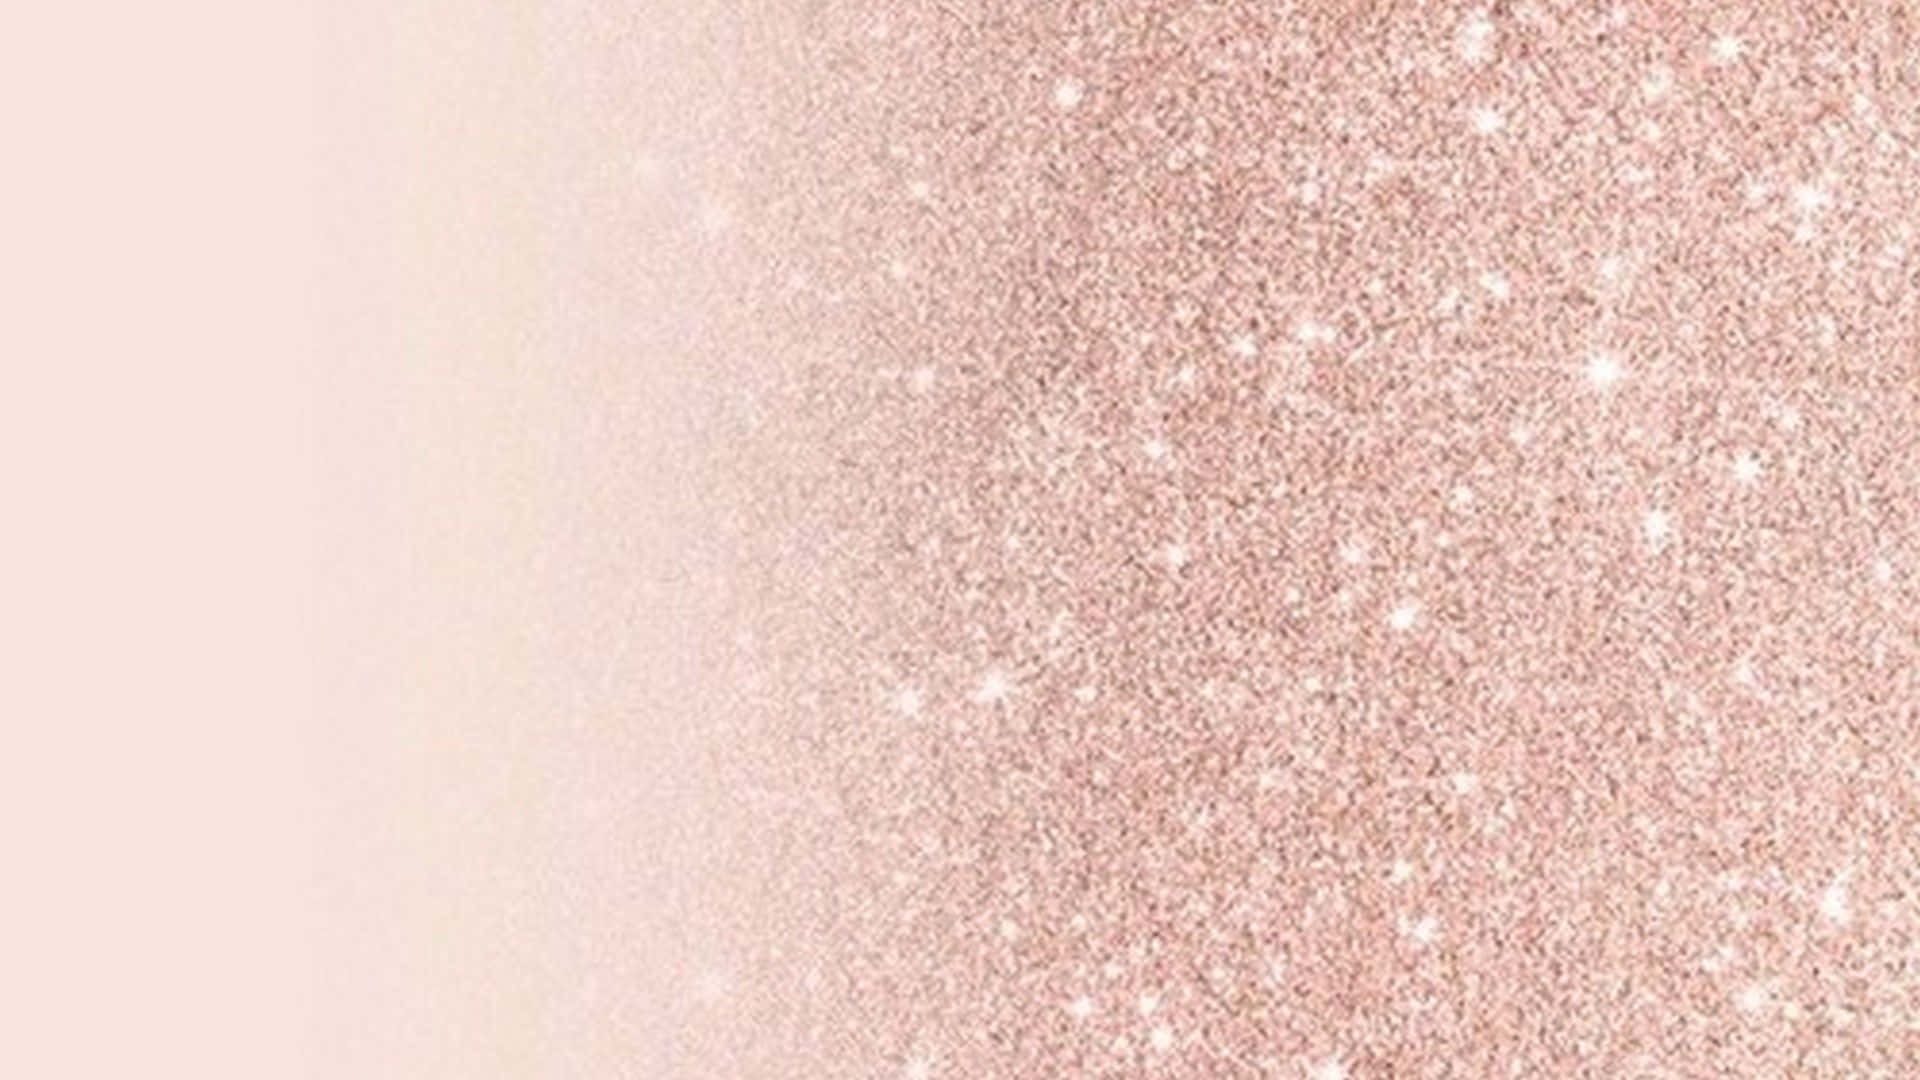 Fading Rose Gold Glitter Background